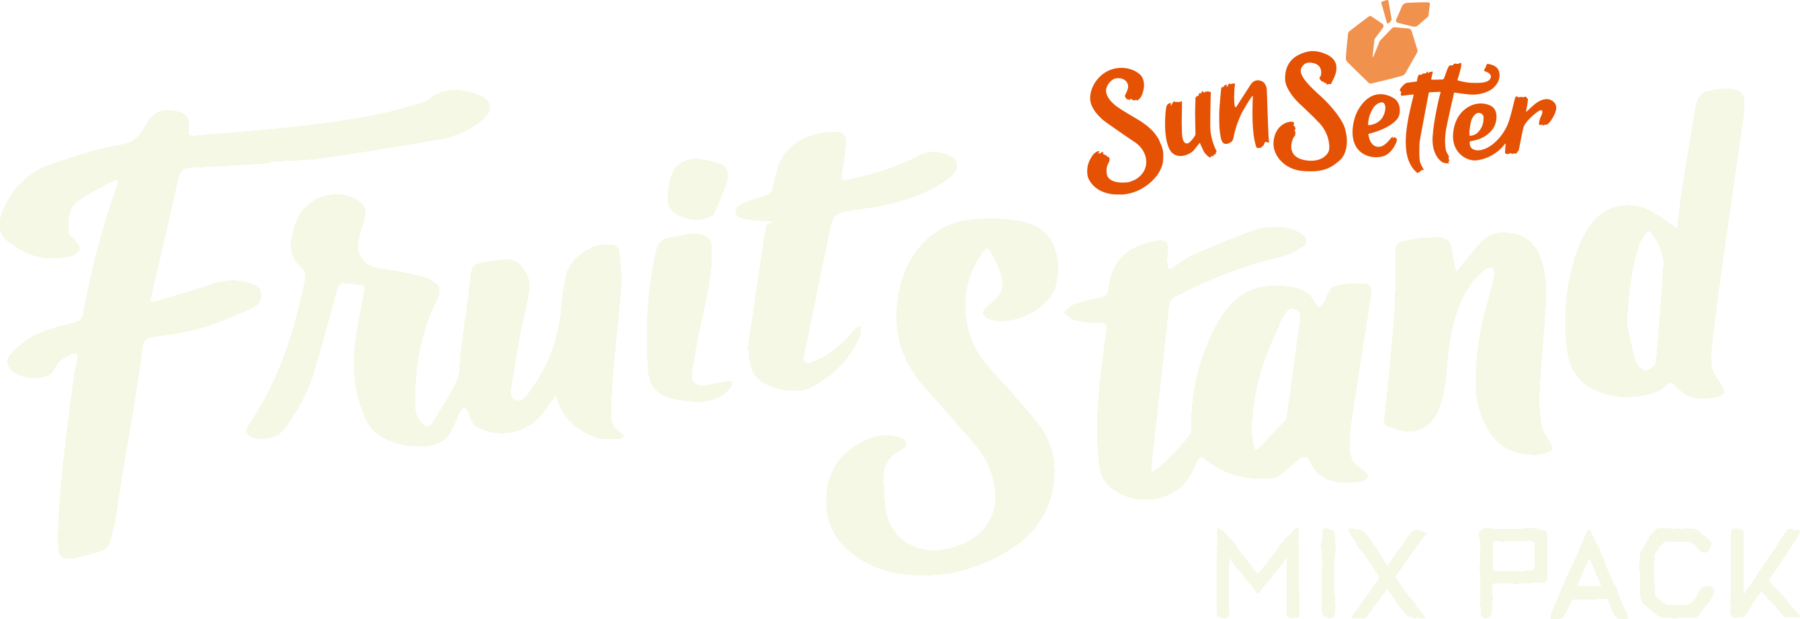 SunSetter Fruit Stand Mix Pack Copy Logo - Stanley Park Brewing